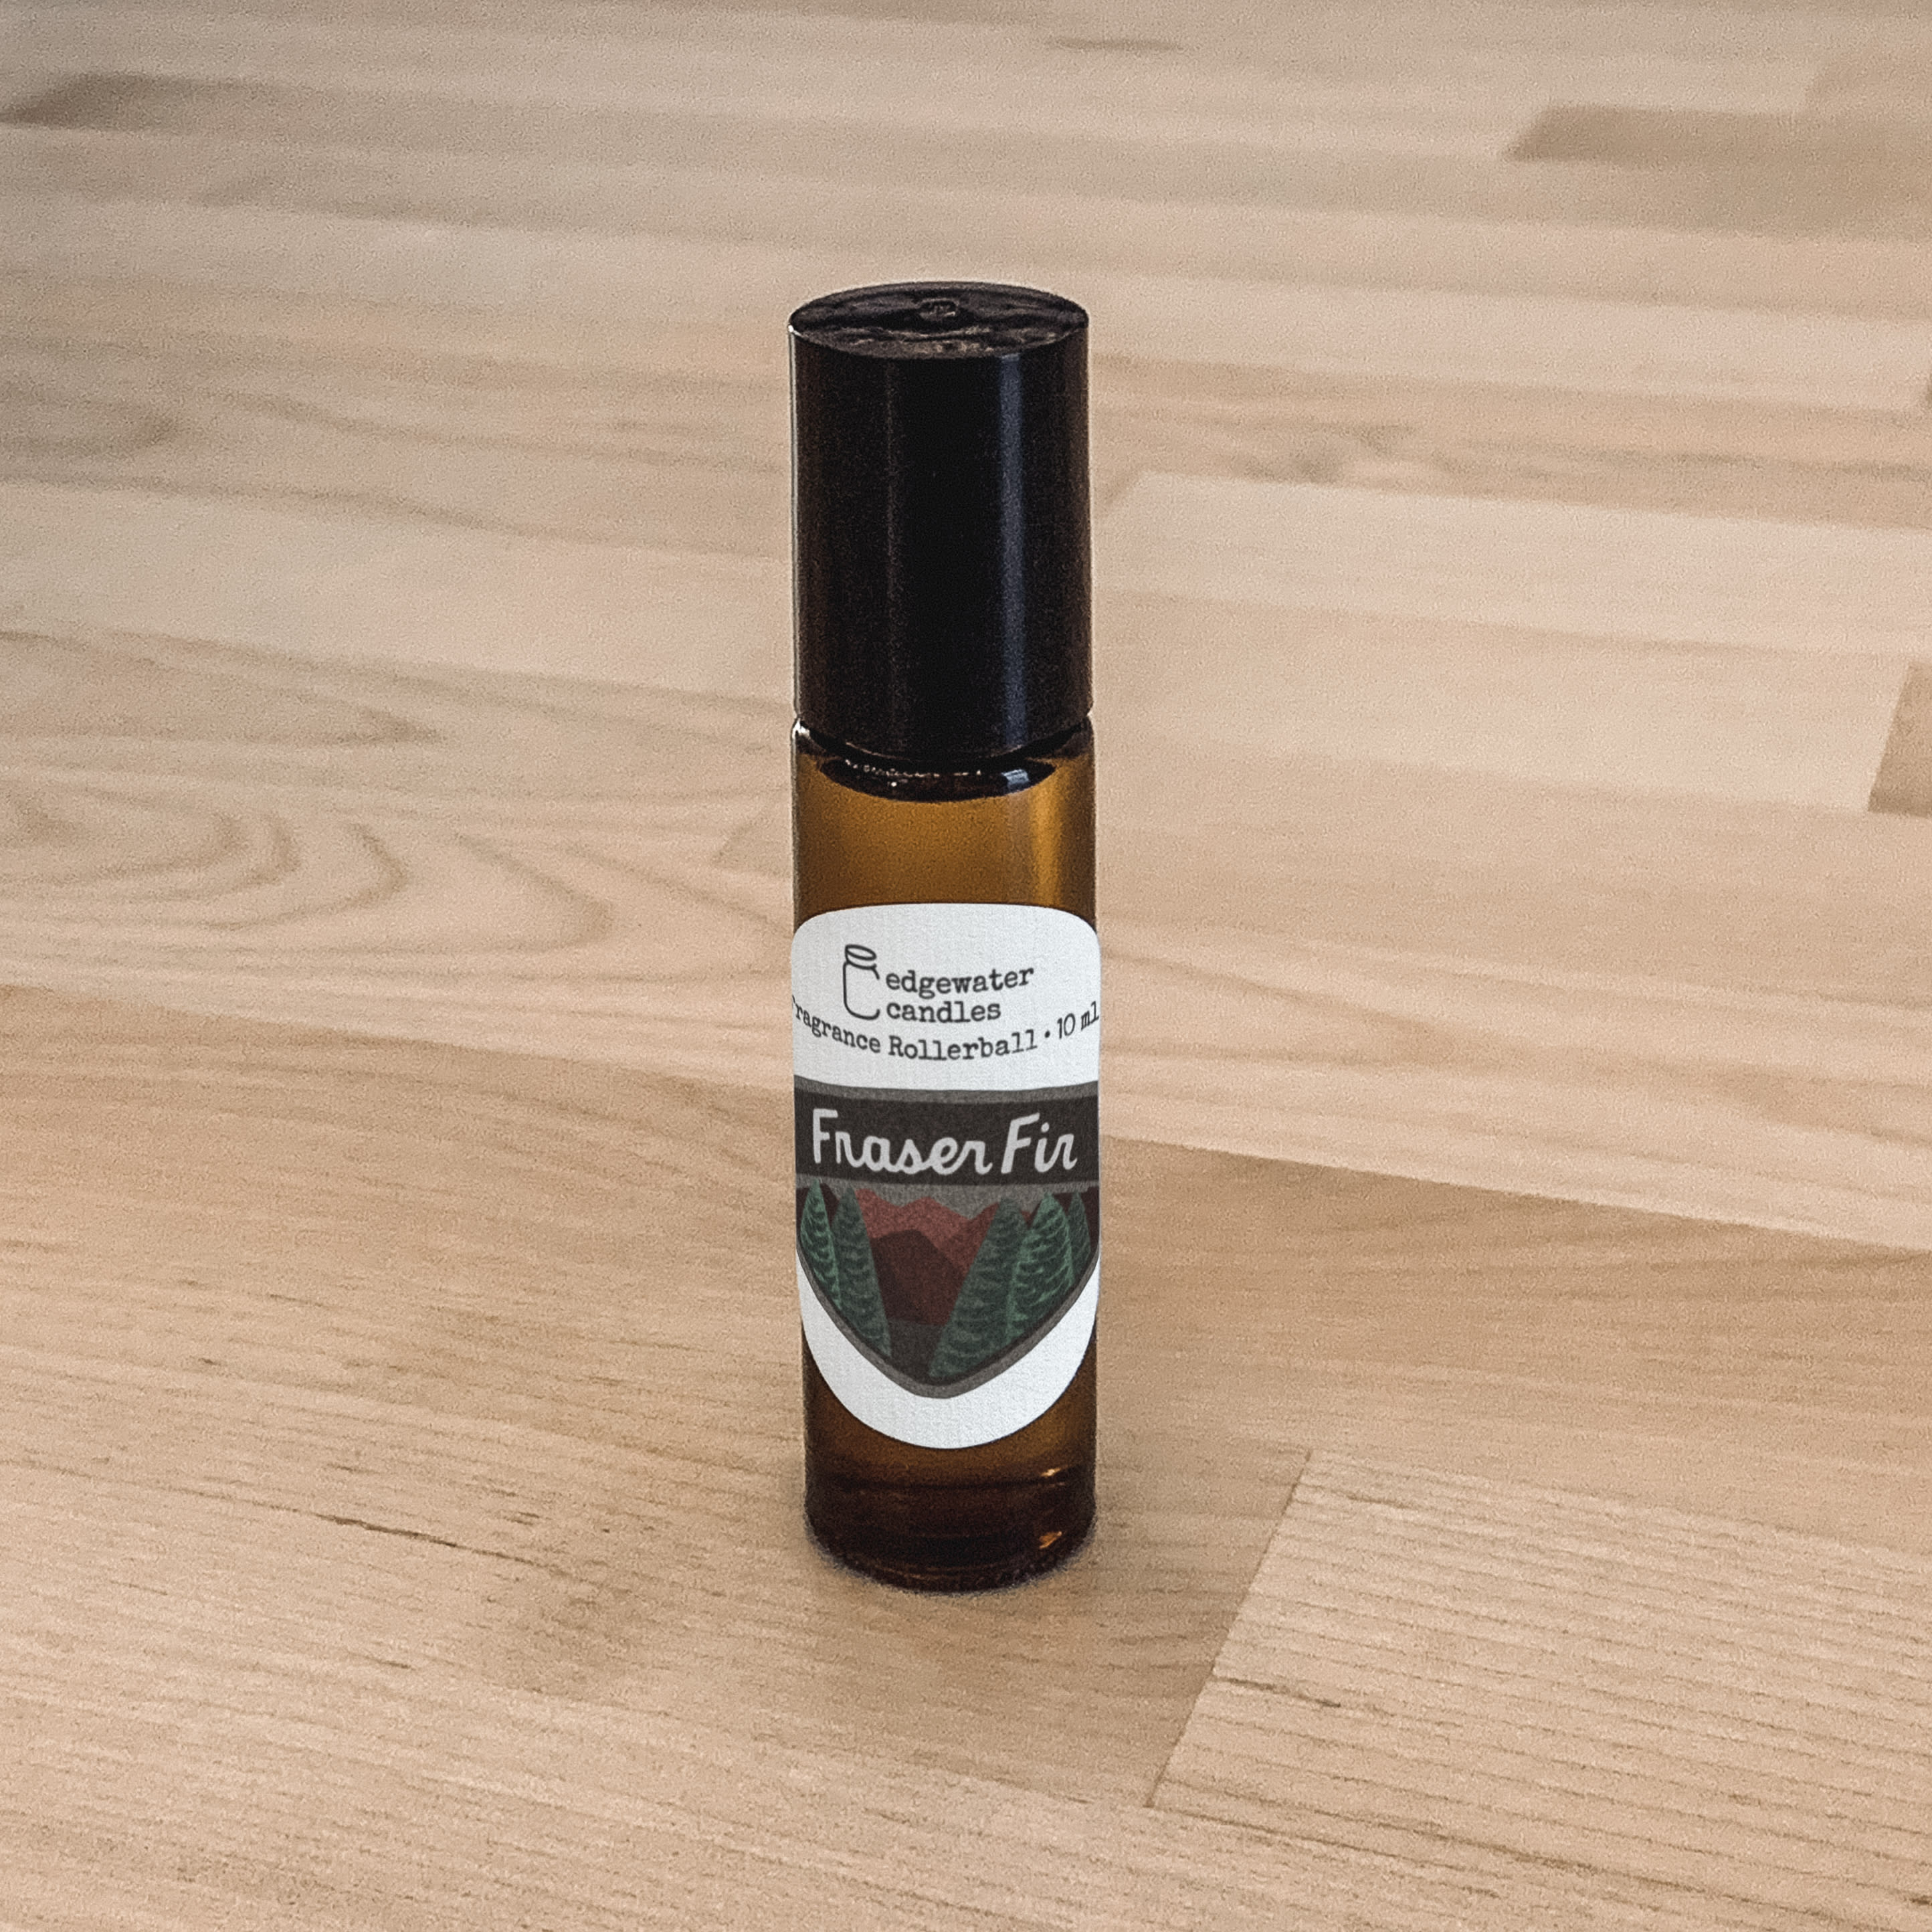 Fraser Fir Wearable Oil Rollerball by Edgewater Candles